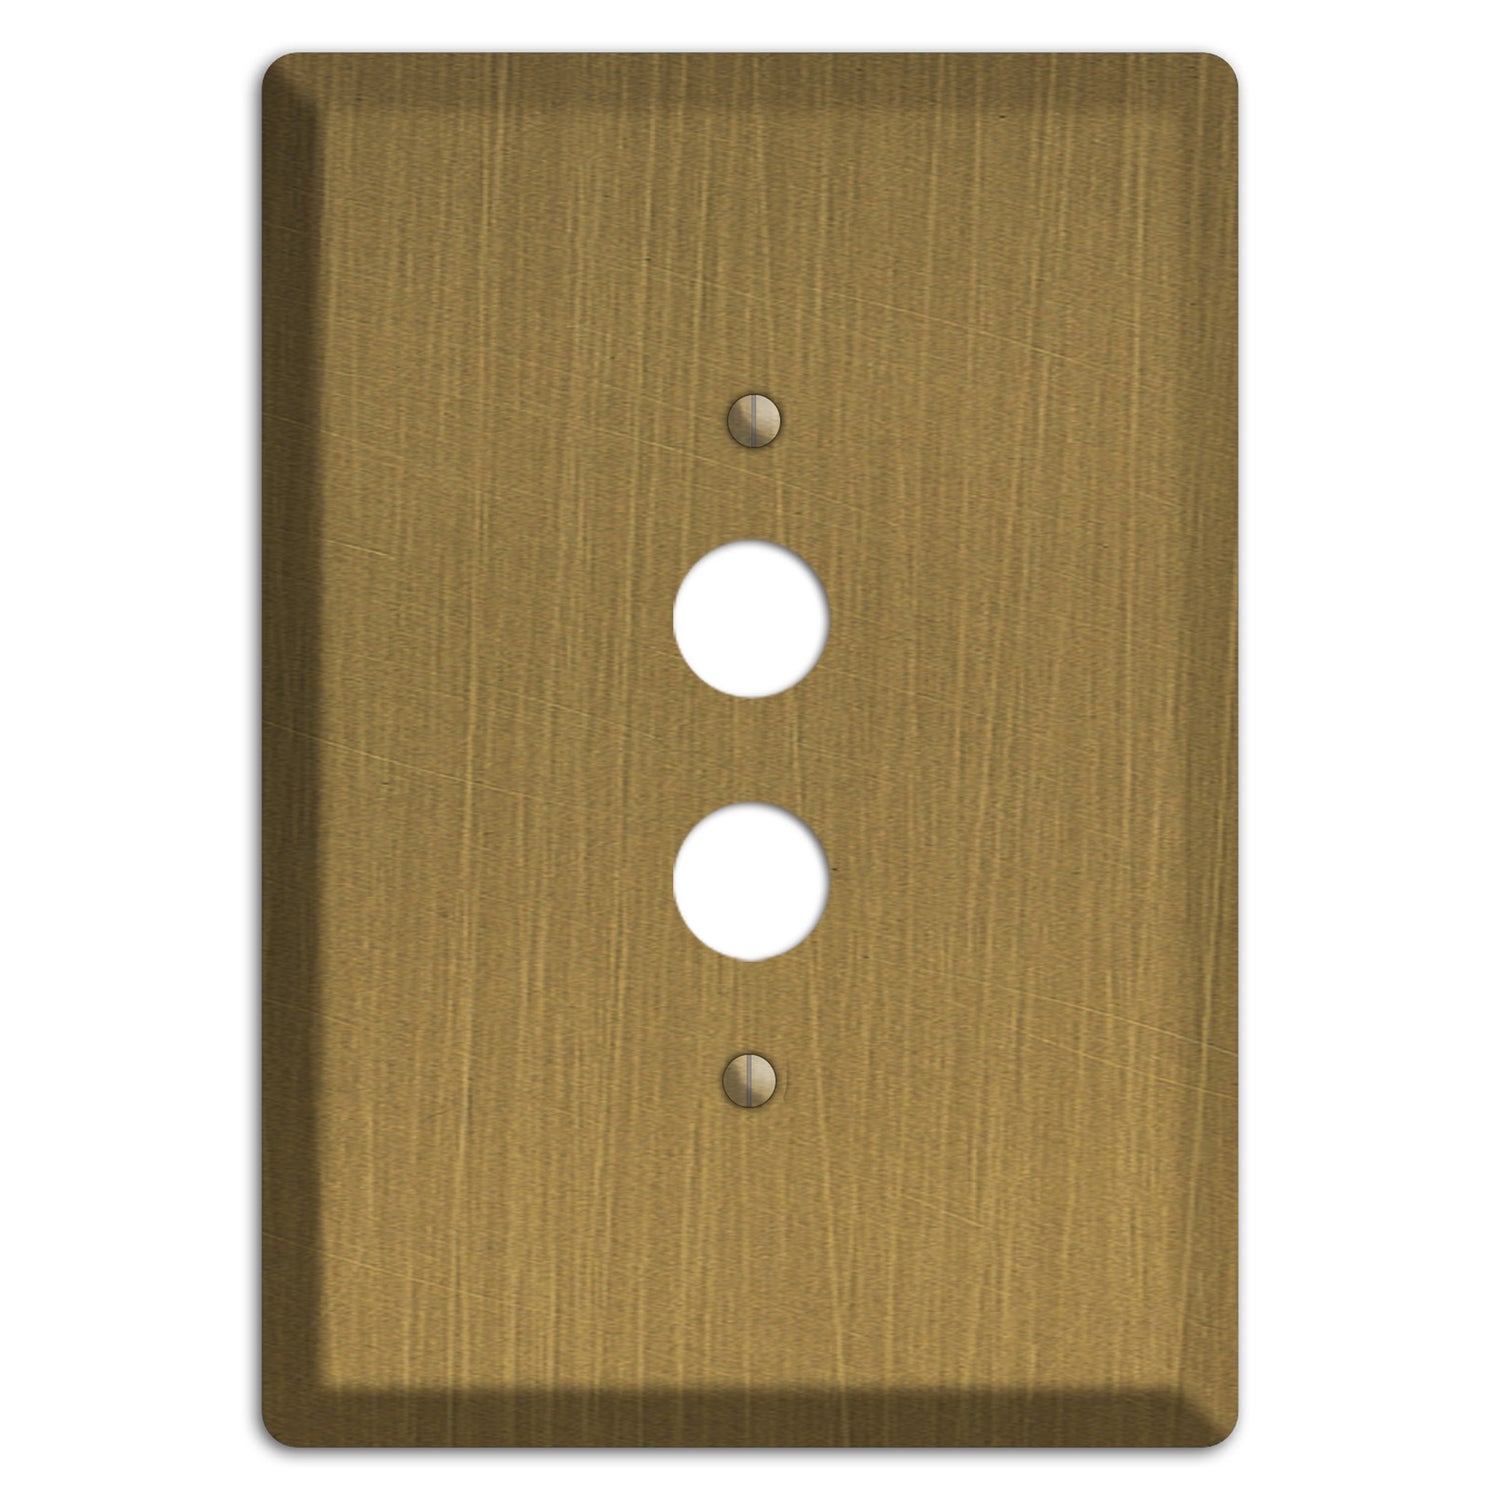 Antique Brushed Solid Brass 1 Pushbutton Wallplate